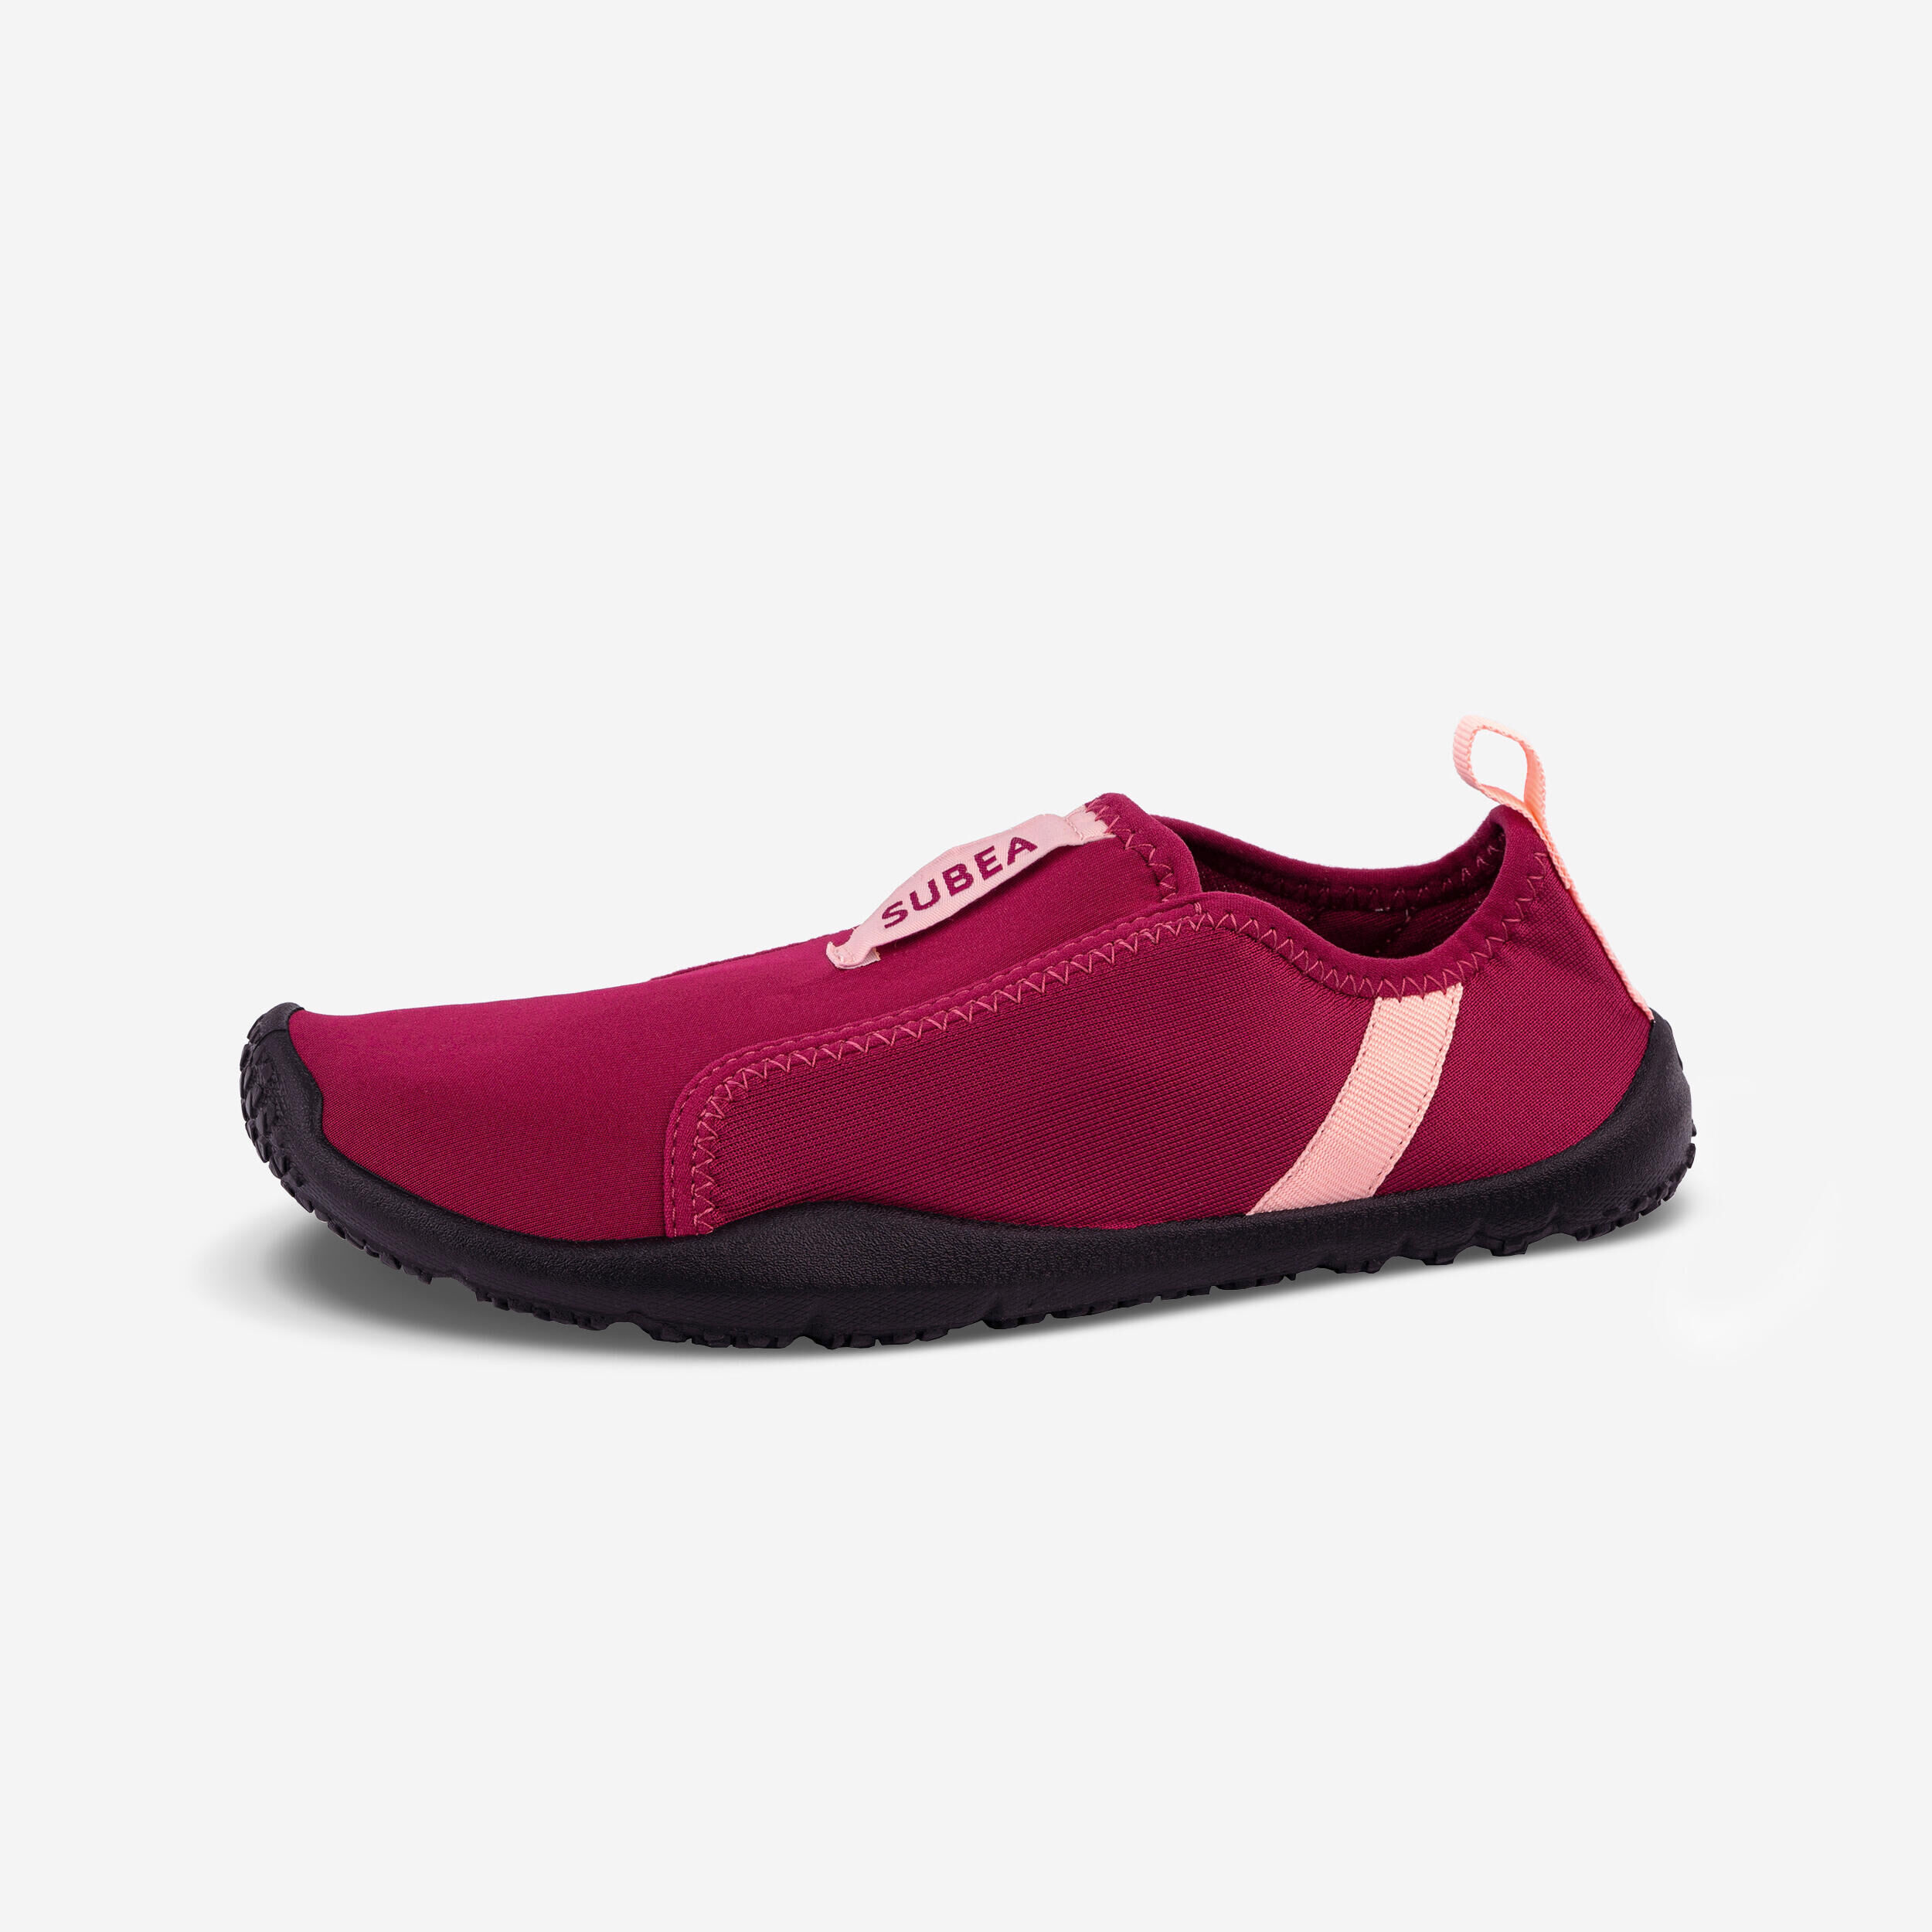 SUBEA Adult Elasticated Water Shoes Aquashoes 120 - Red